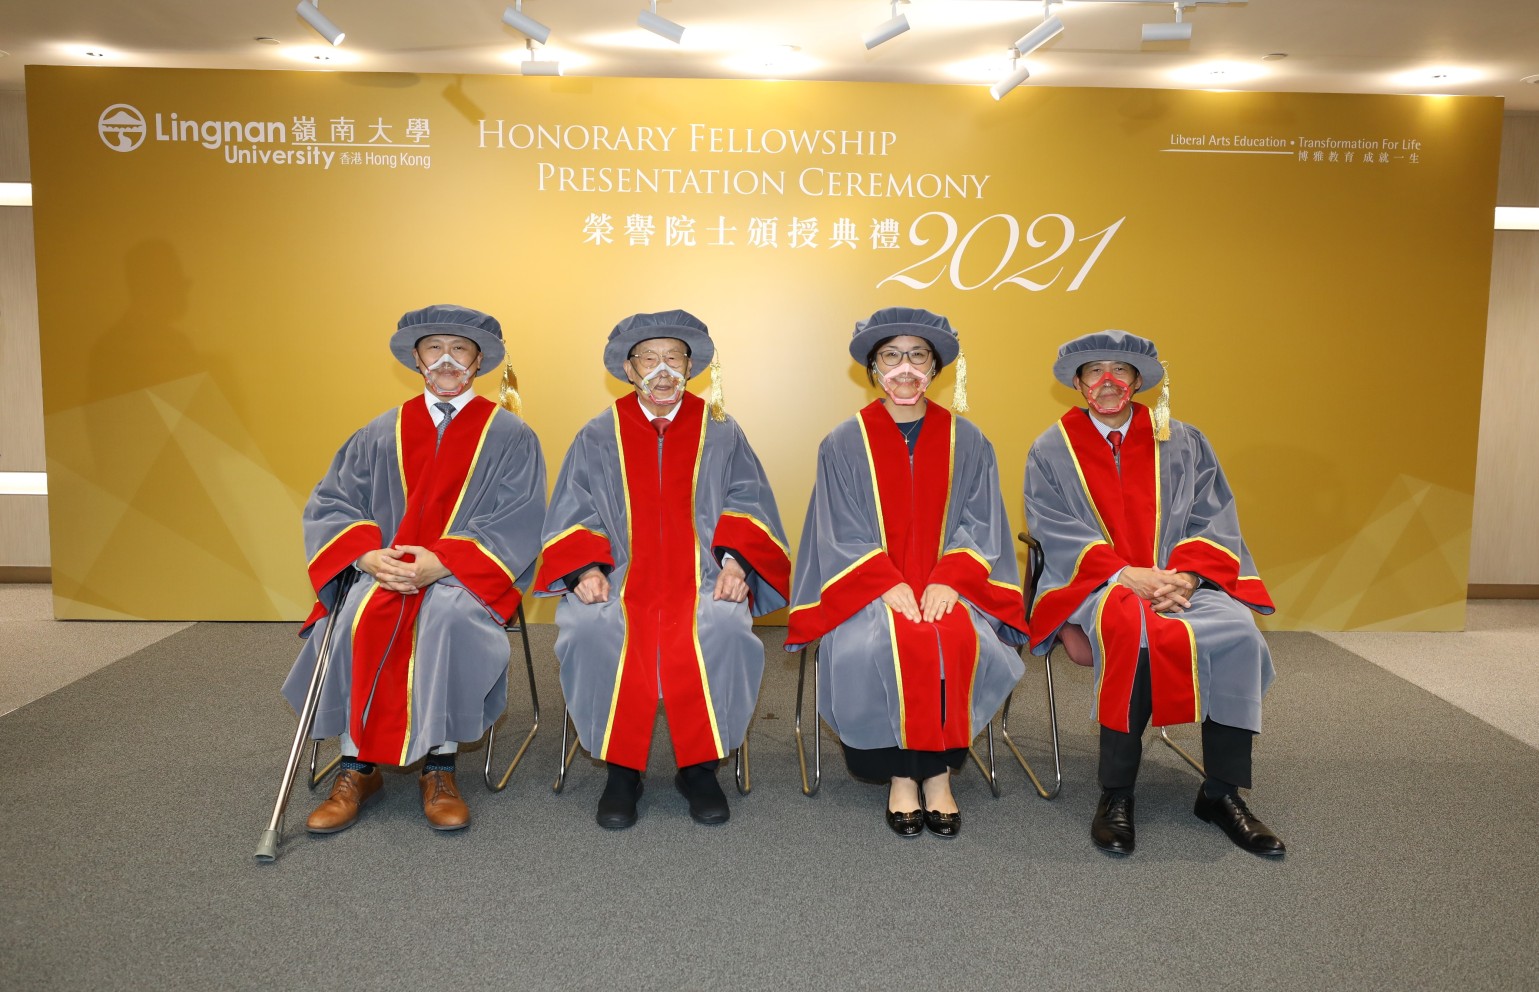 The four honorary fellows: (From left) Mr Nelson Yip Siu-hong, Mr Chan Wai-nam, Ms Christina Maisenne Lee, and Mr Simon Ip Shing-hing.